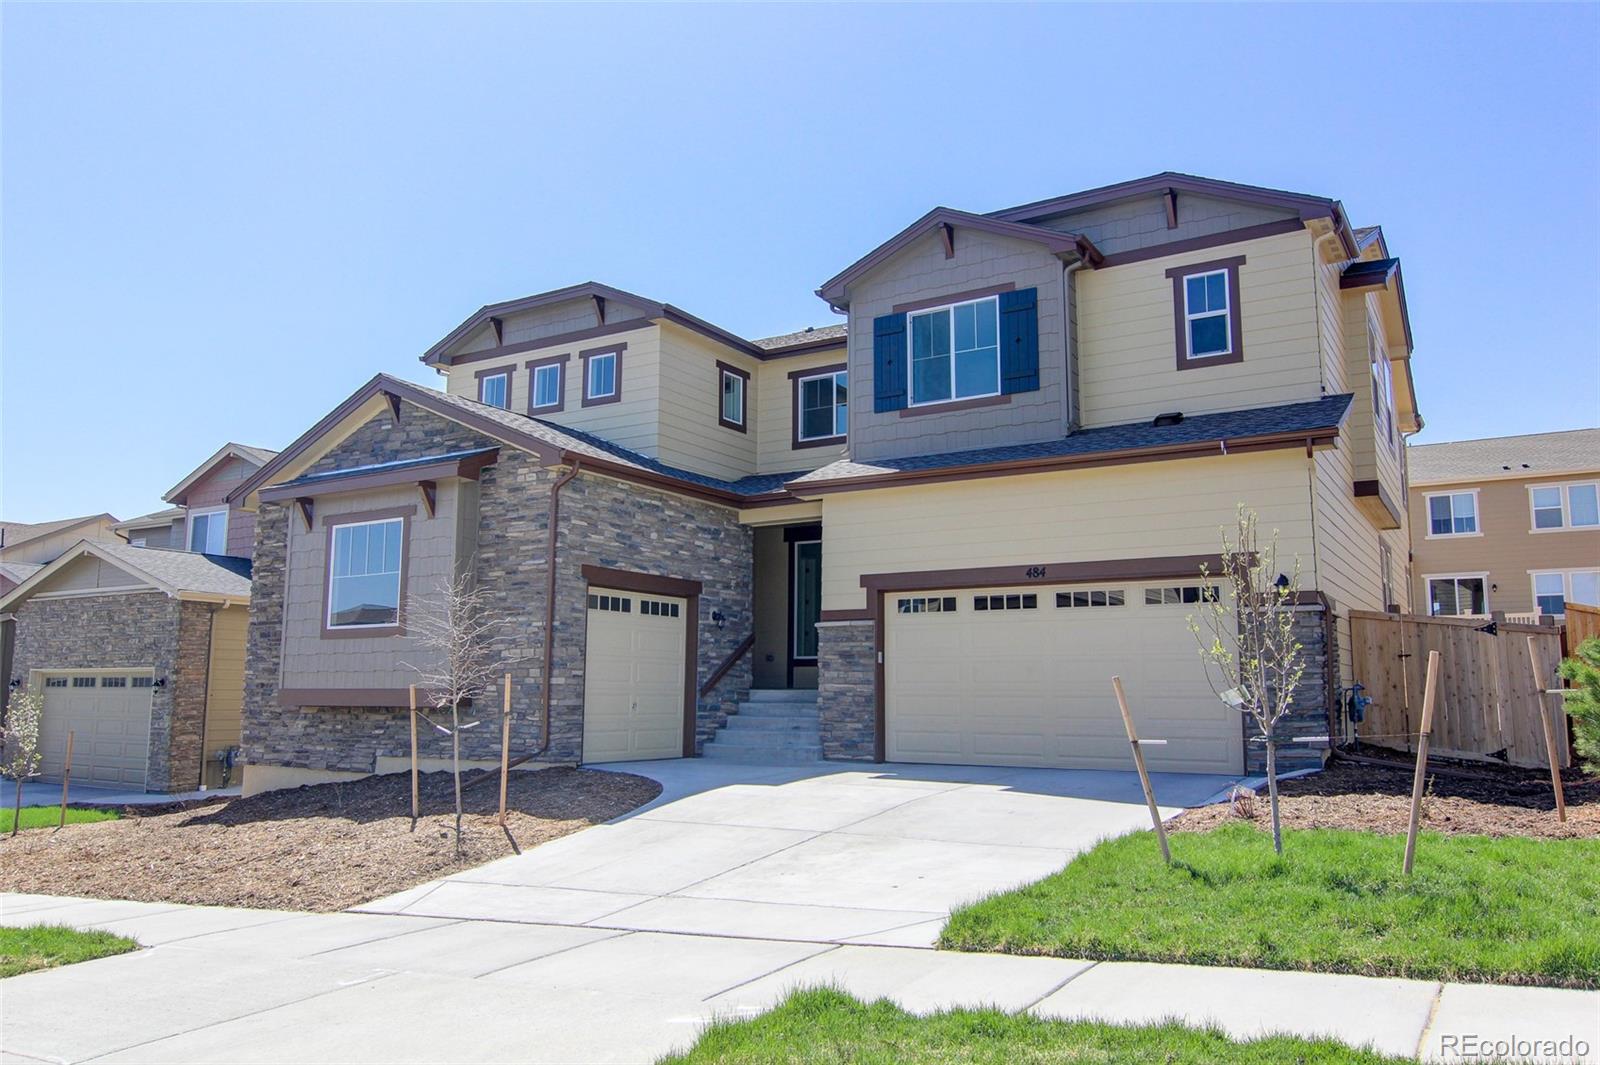 484 W 128th Drive, Westminster, CO 80234 - MLS#: 6821966